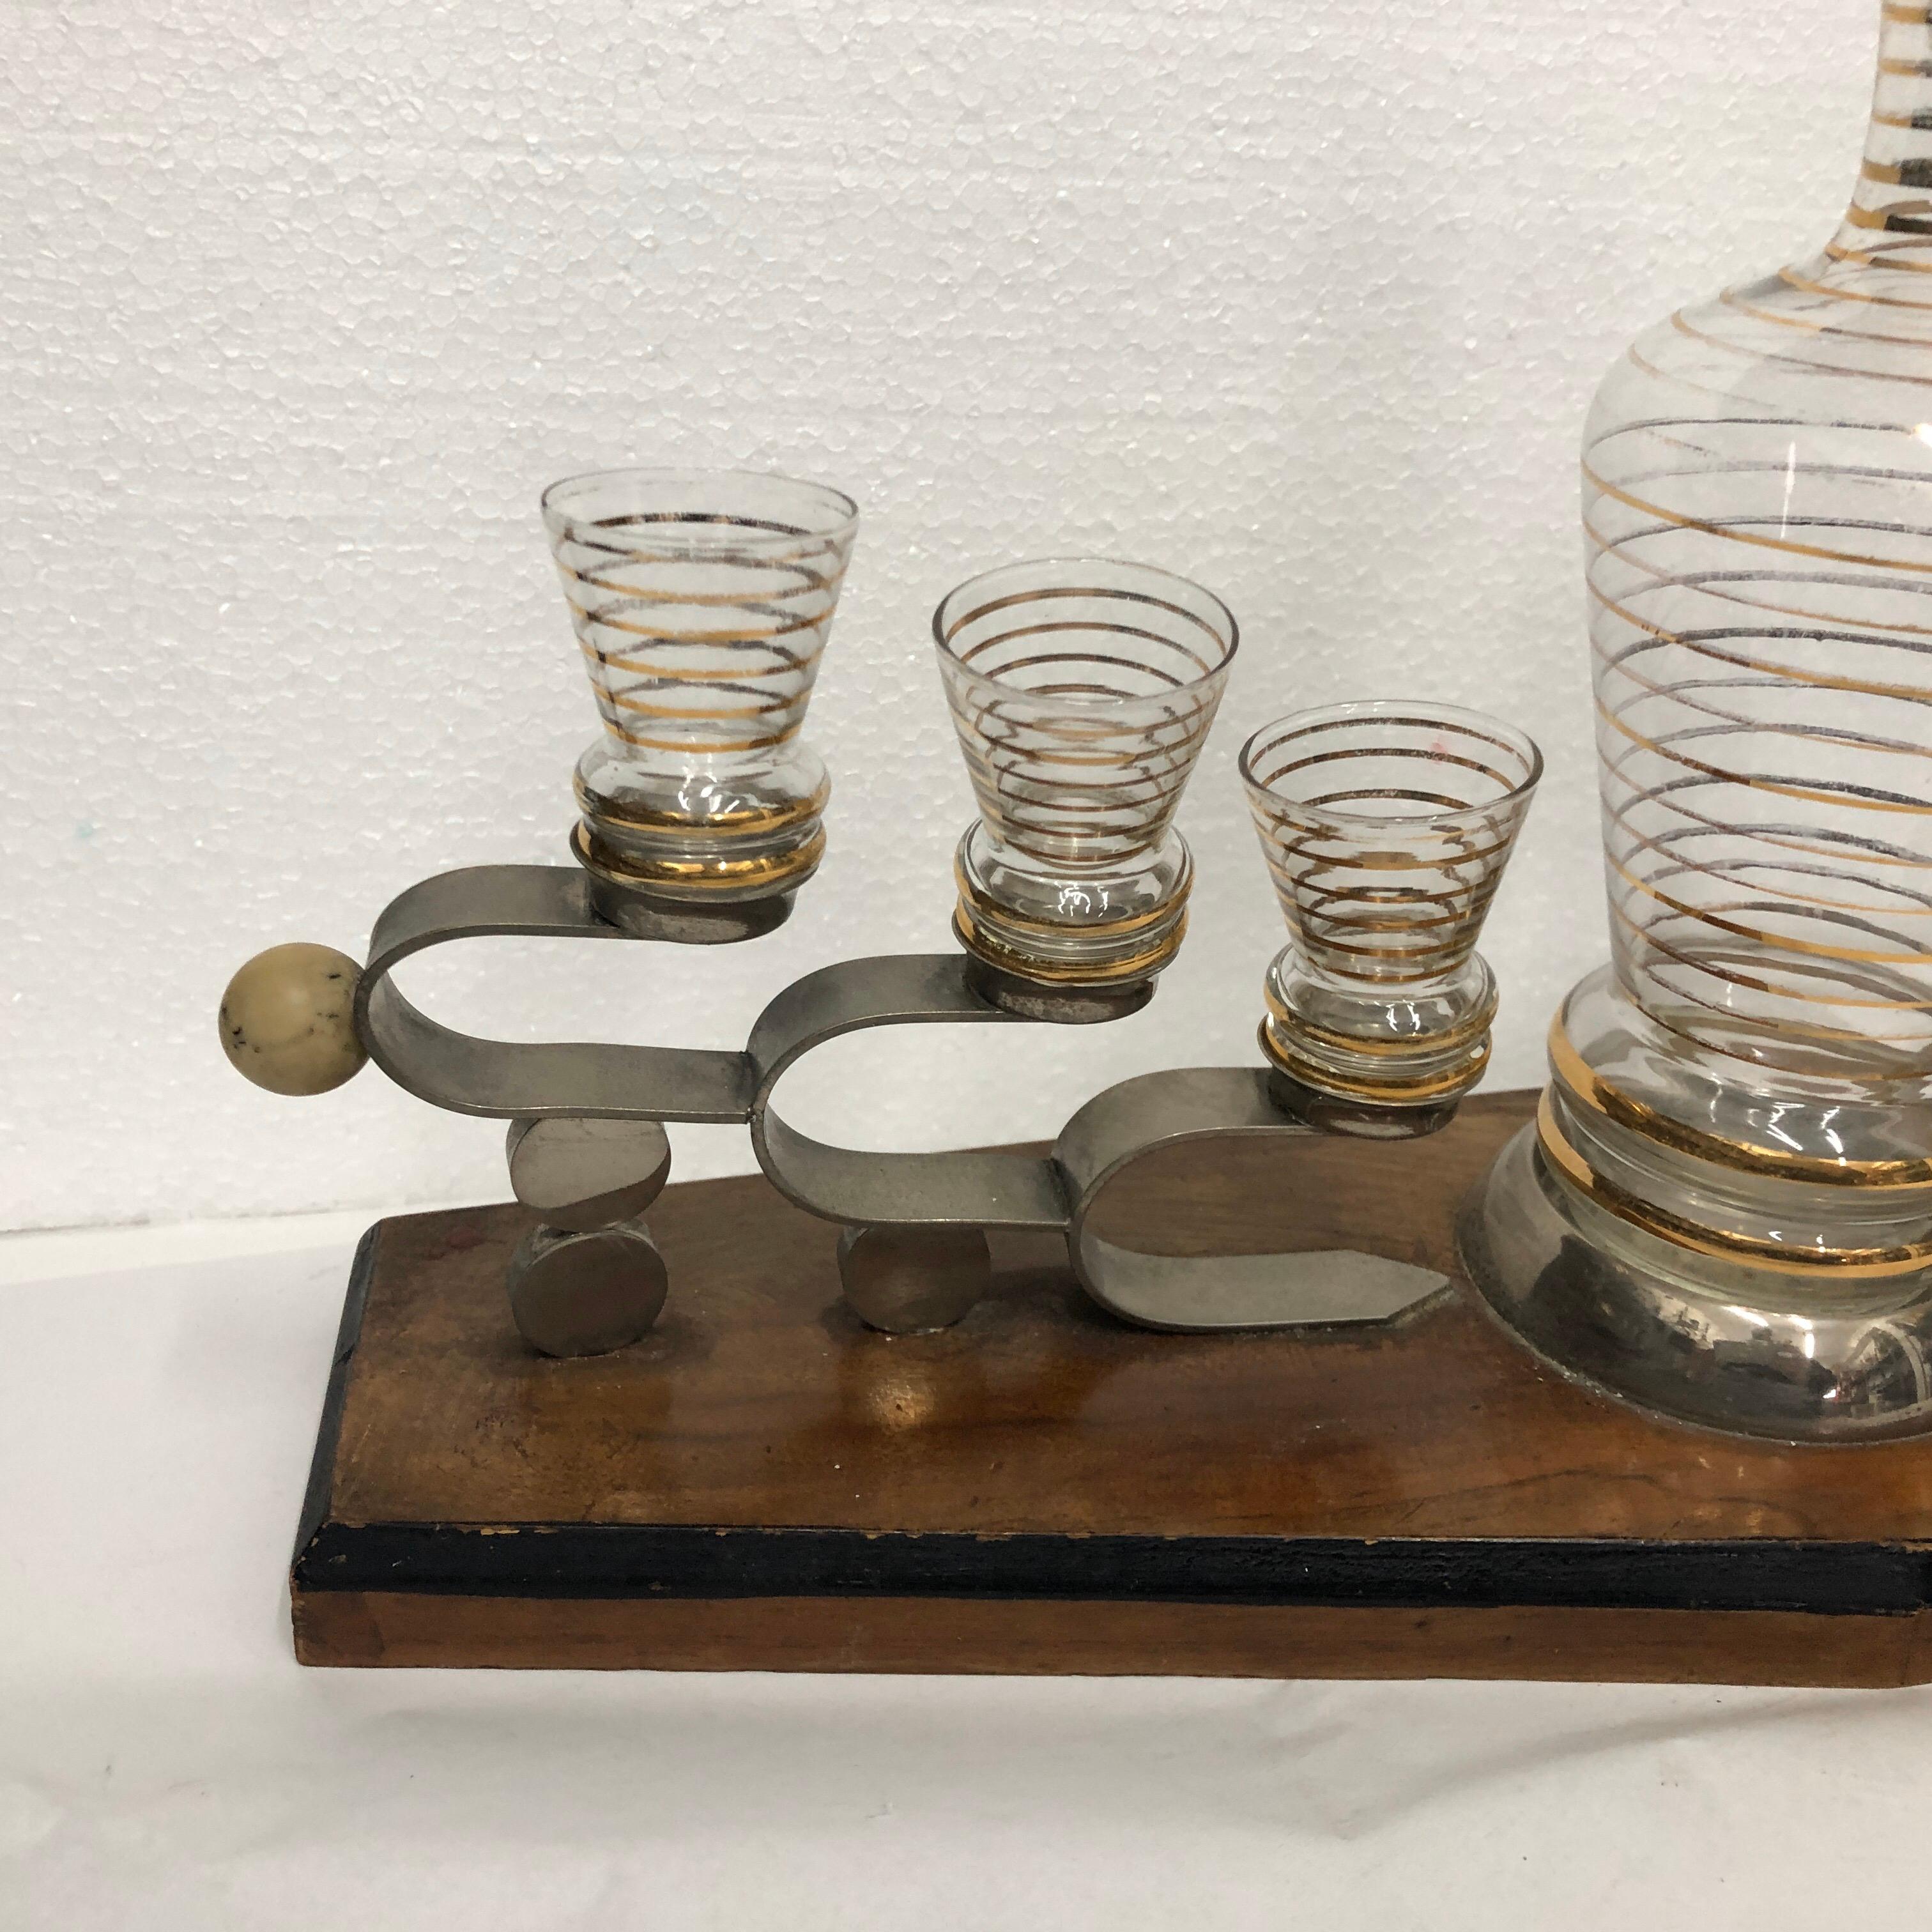 Stylish Italian liquor set, wood, silver plate and glasses are in very good conditions.